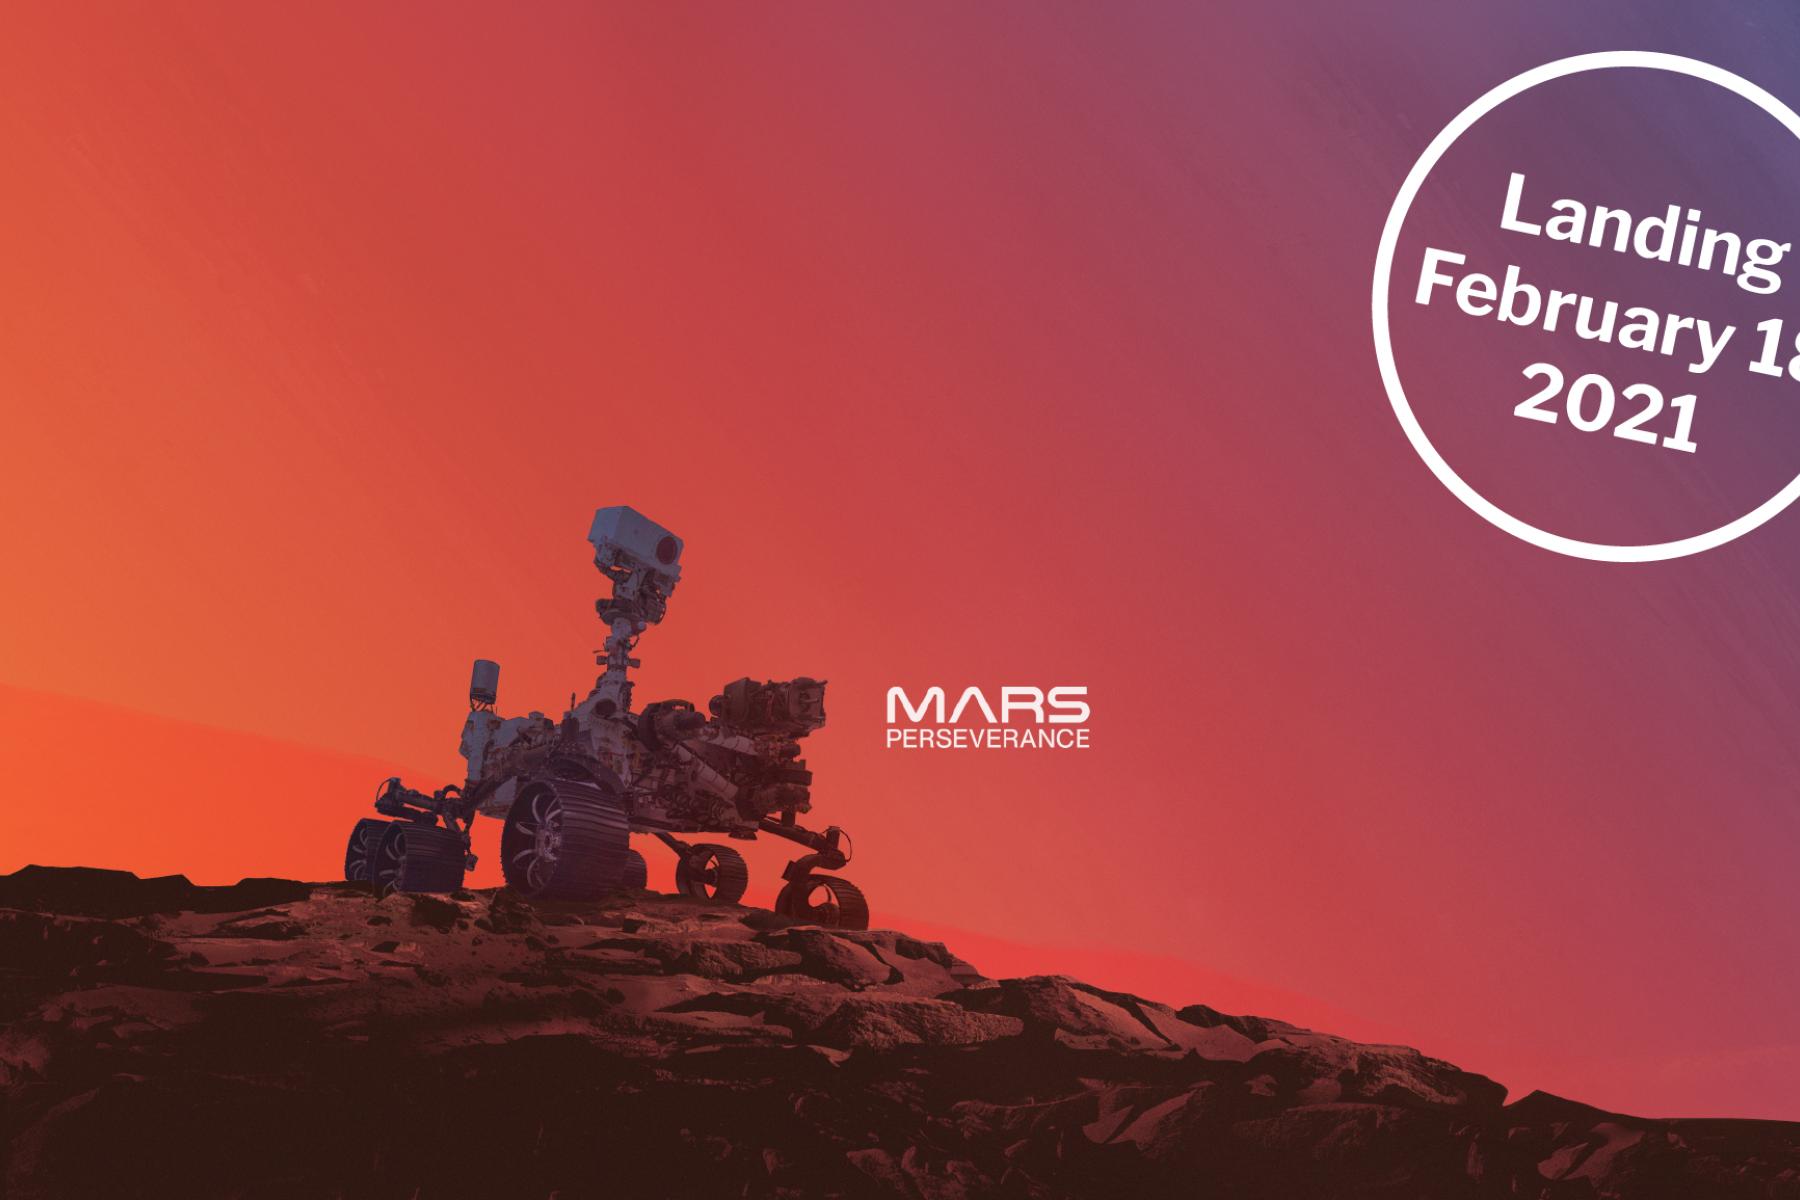 Mars Perseverance landing graphic with landing date